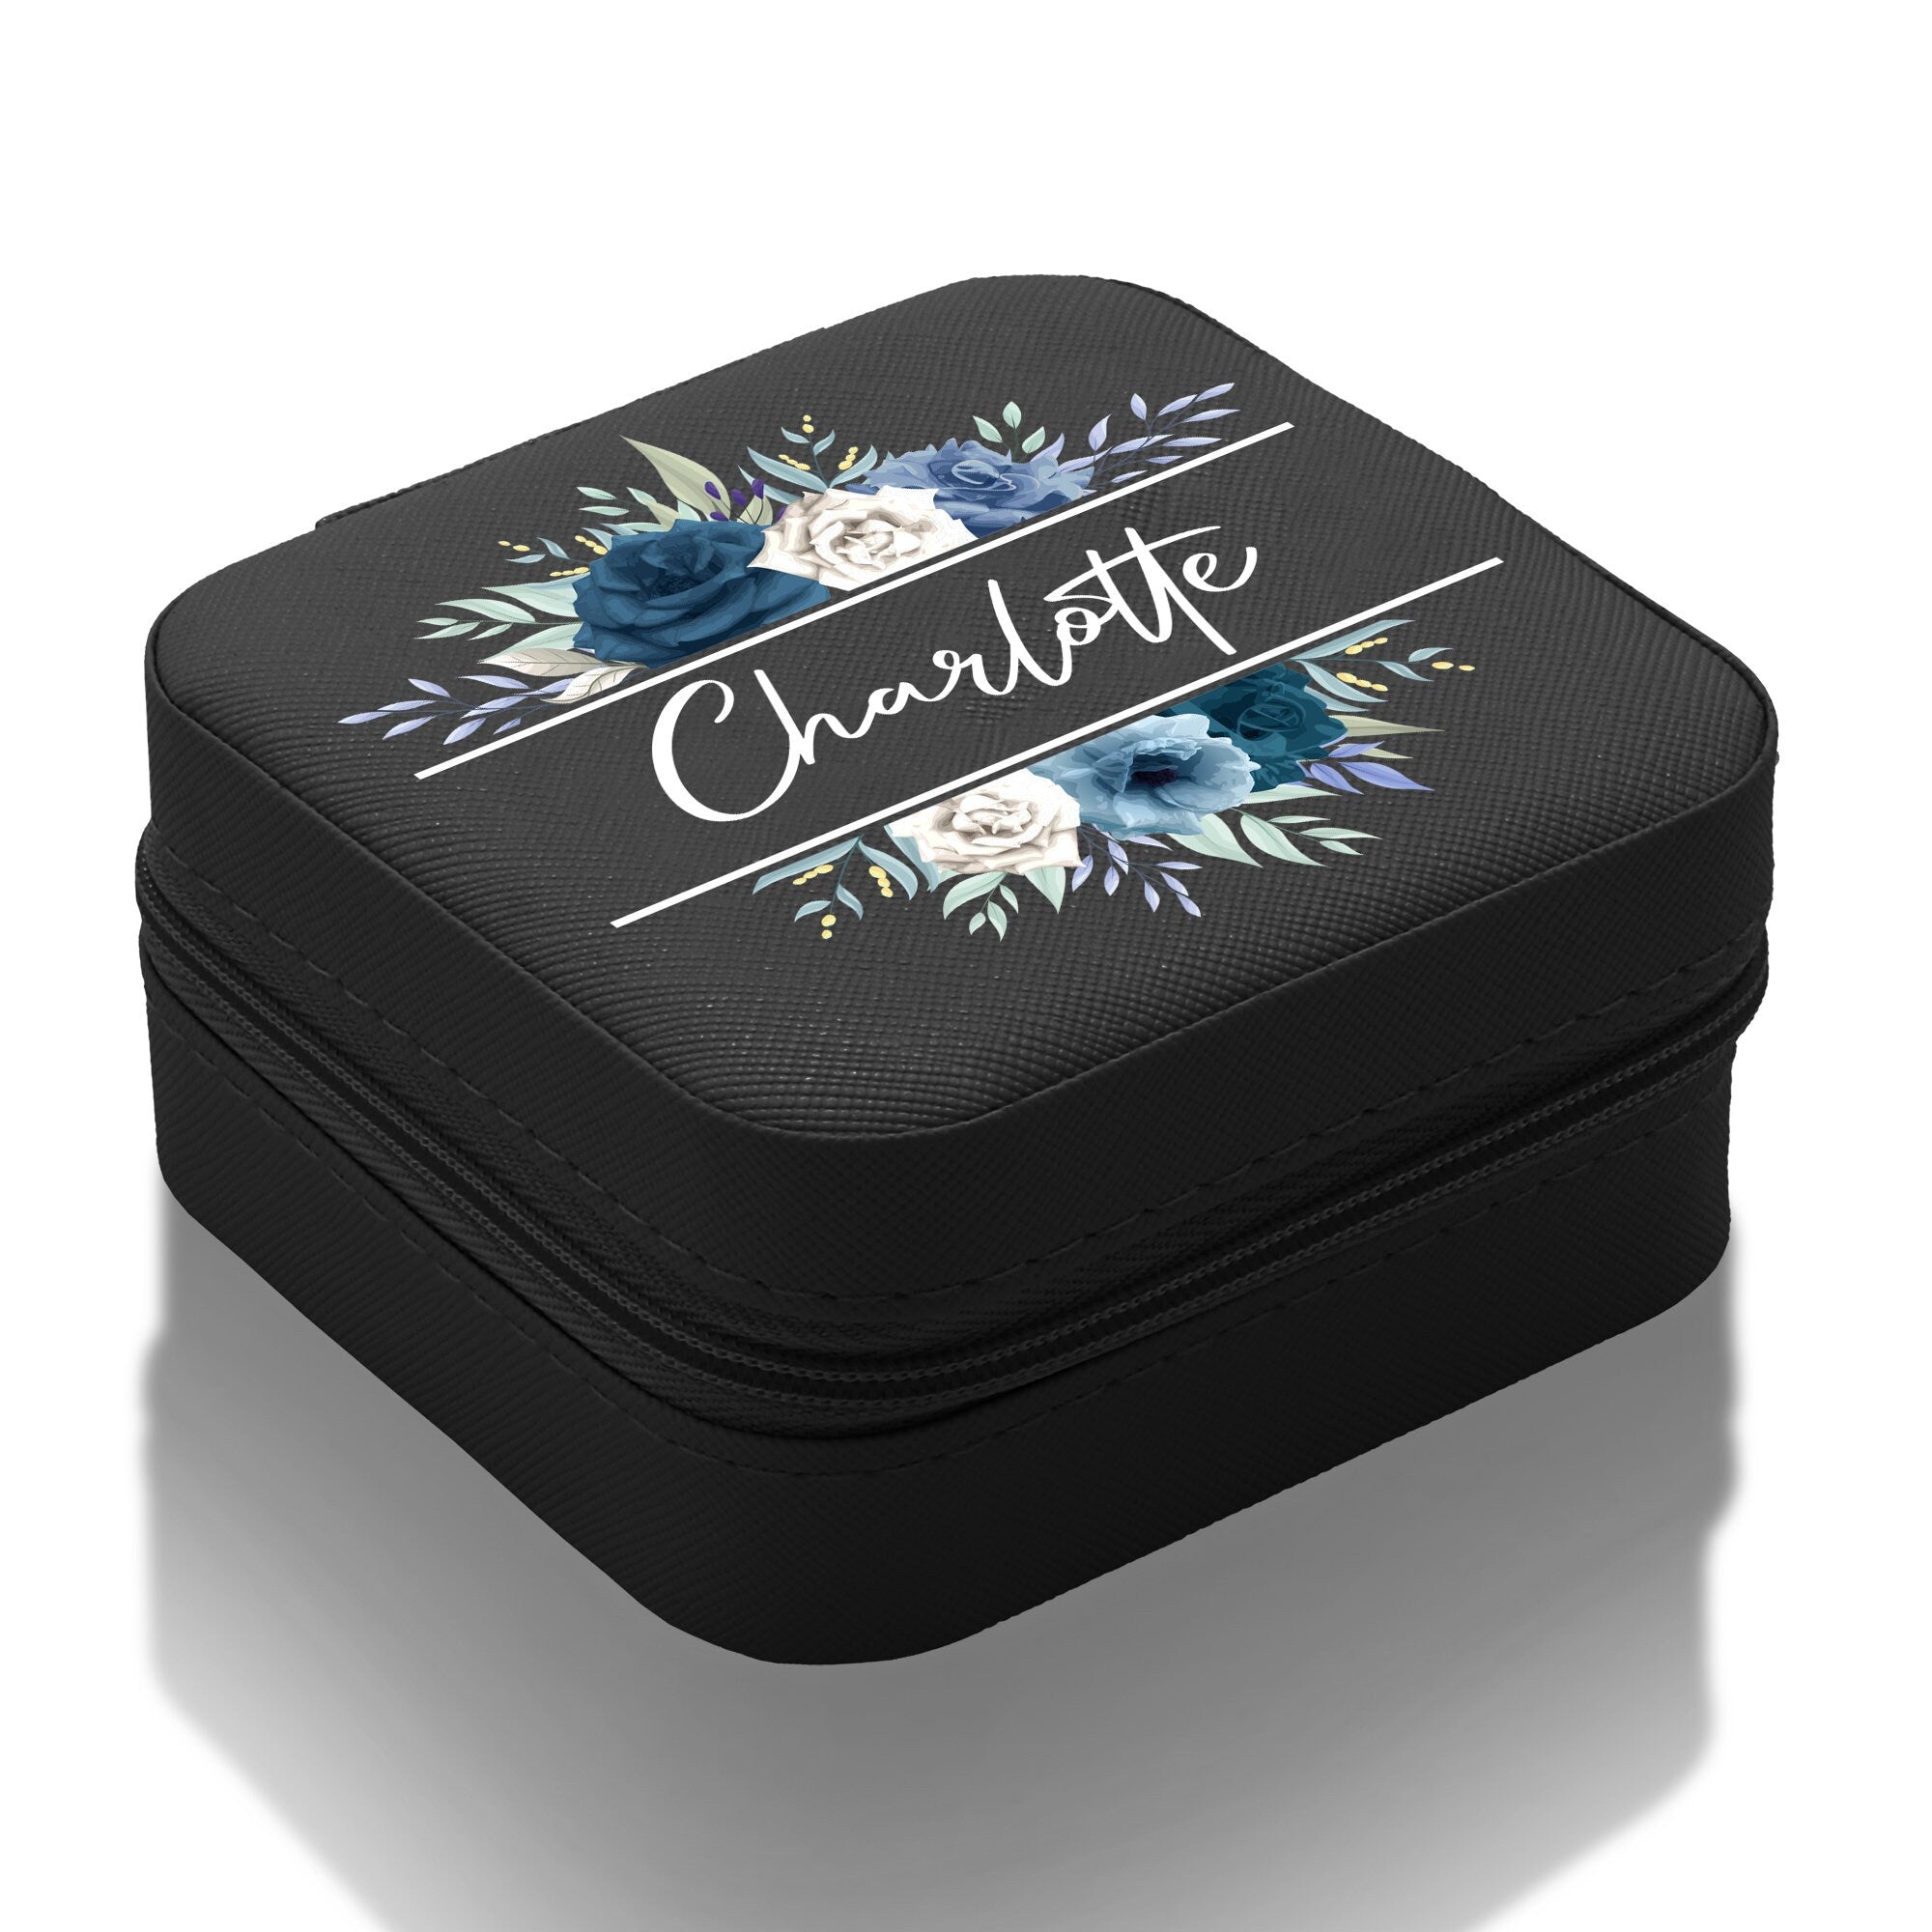 a black box with a floral design on it